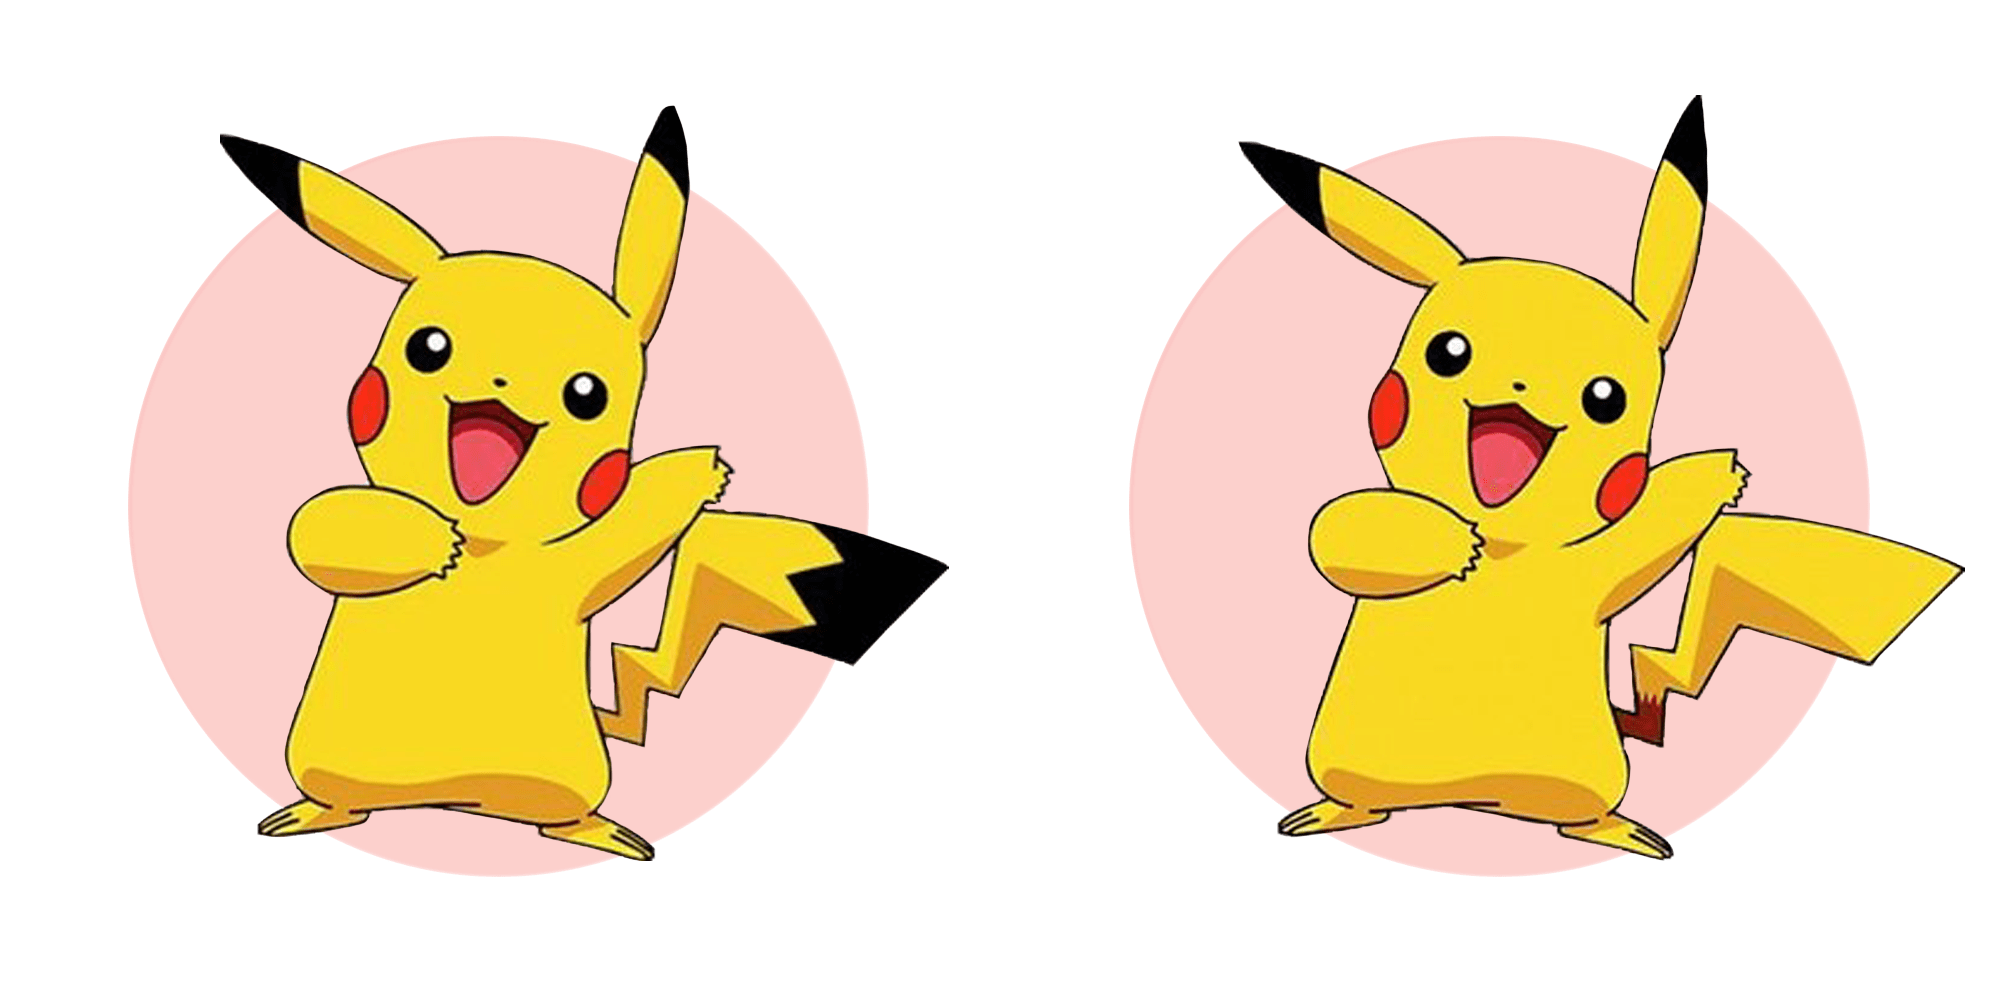 The tail of Pikachu originally does not have any black color.